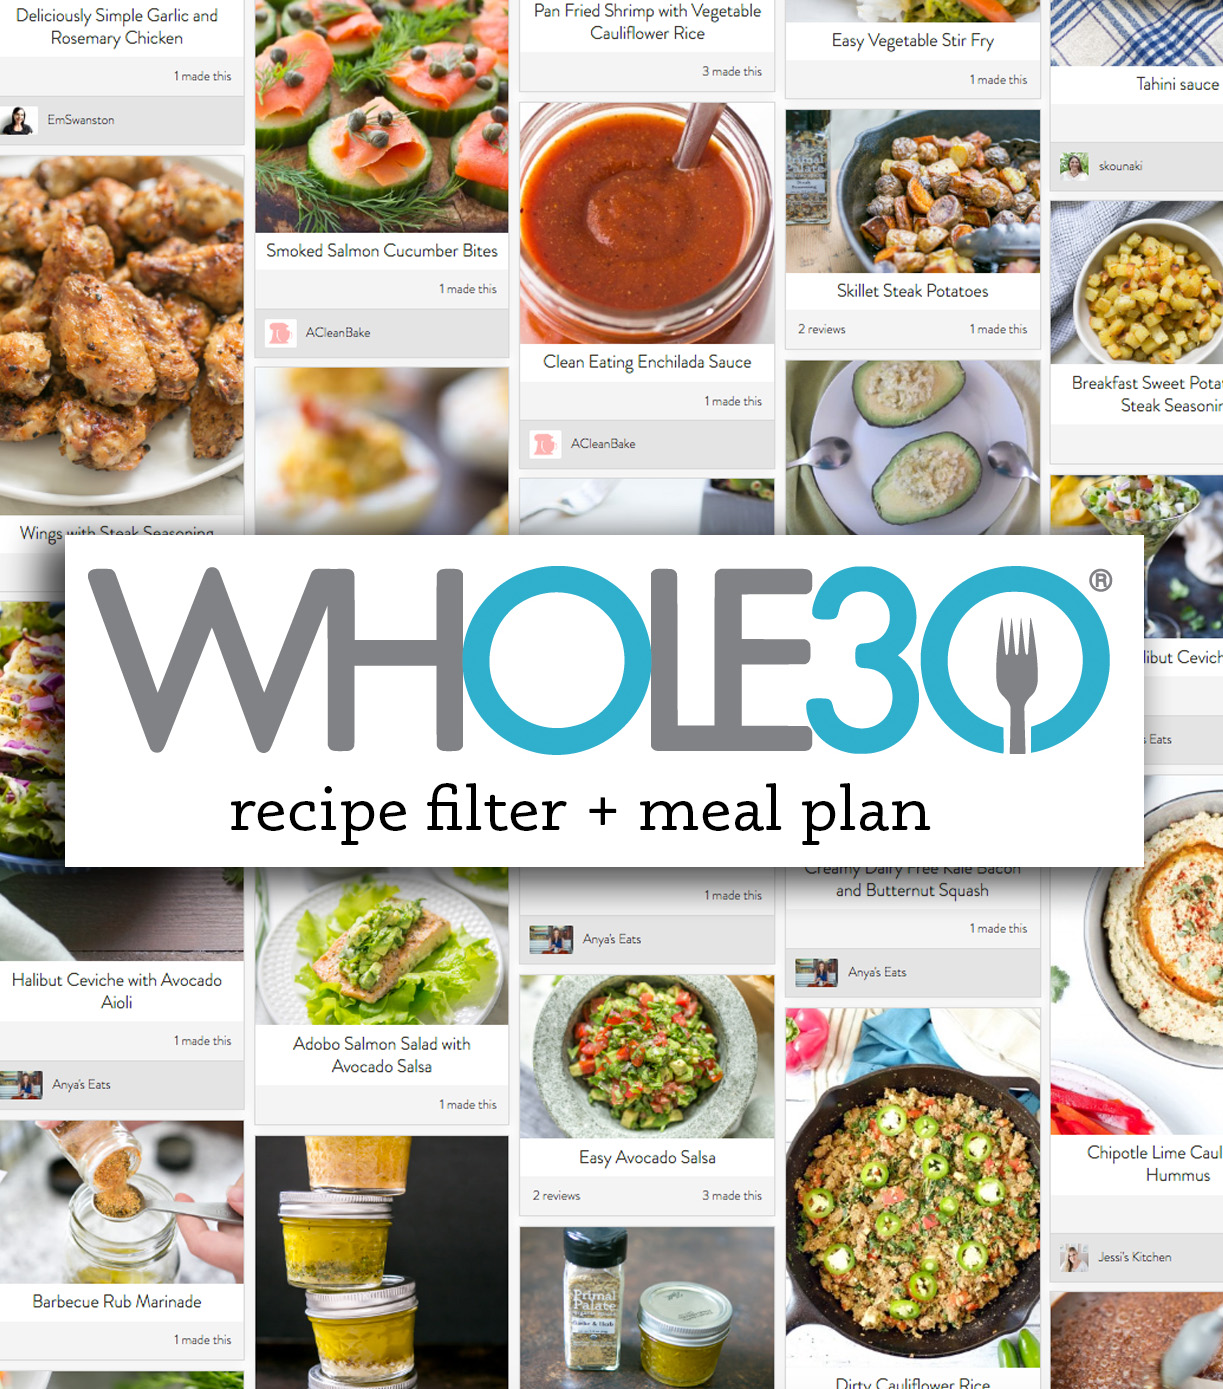 https://www.primalpalate.com/wp-content/uploads/2017/01/Whole30-filter-and-meal-plan.jpg